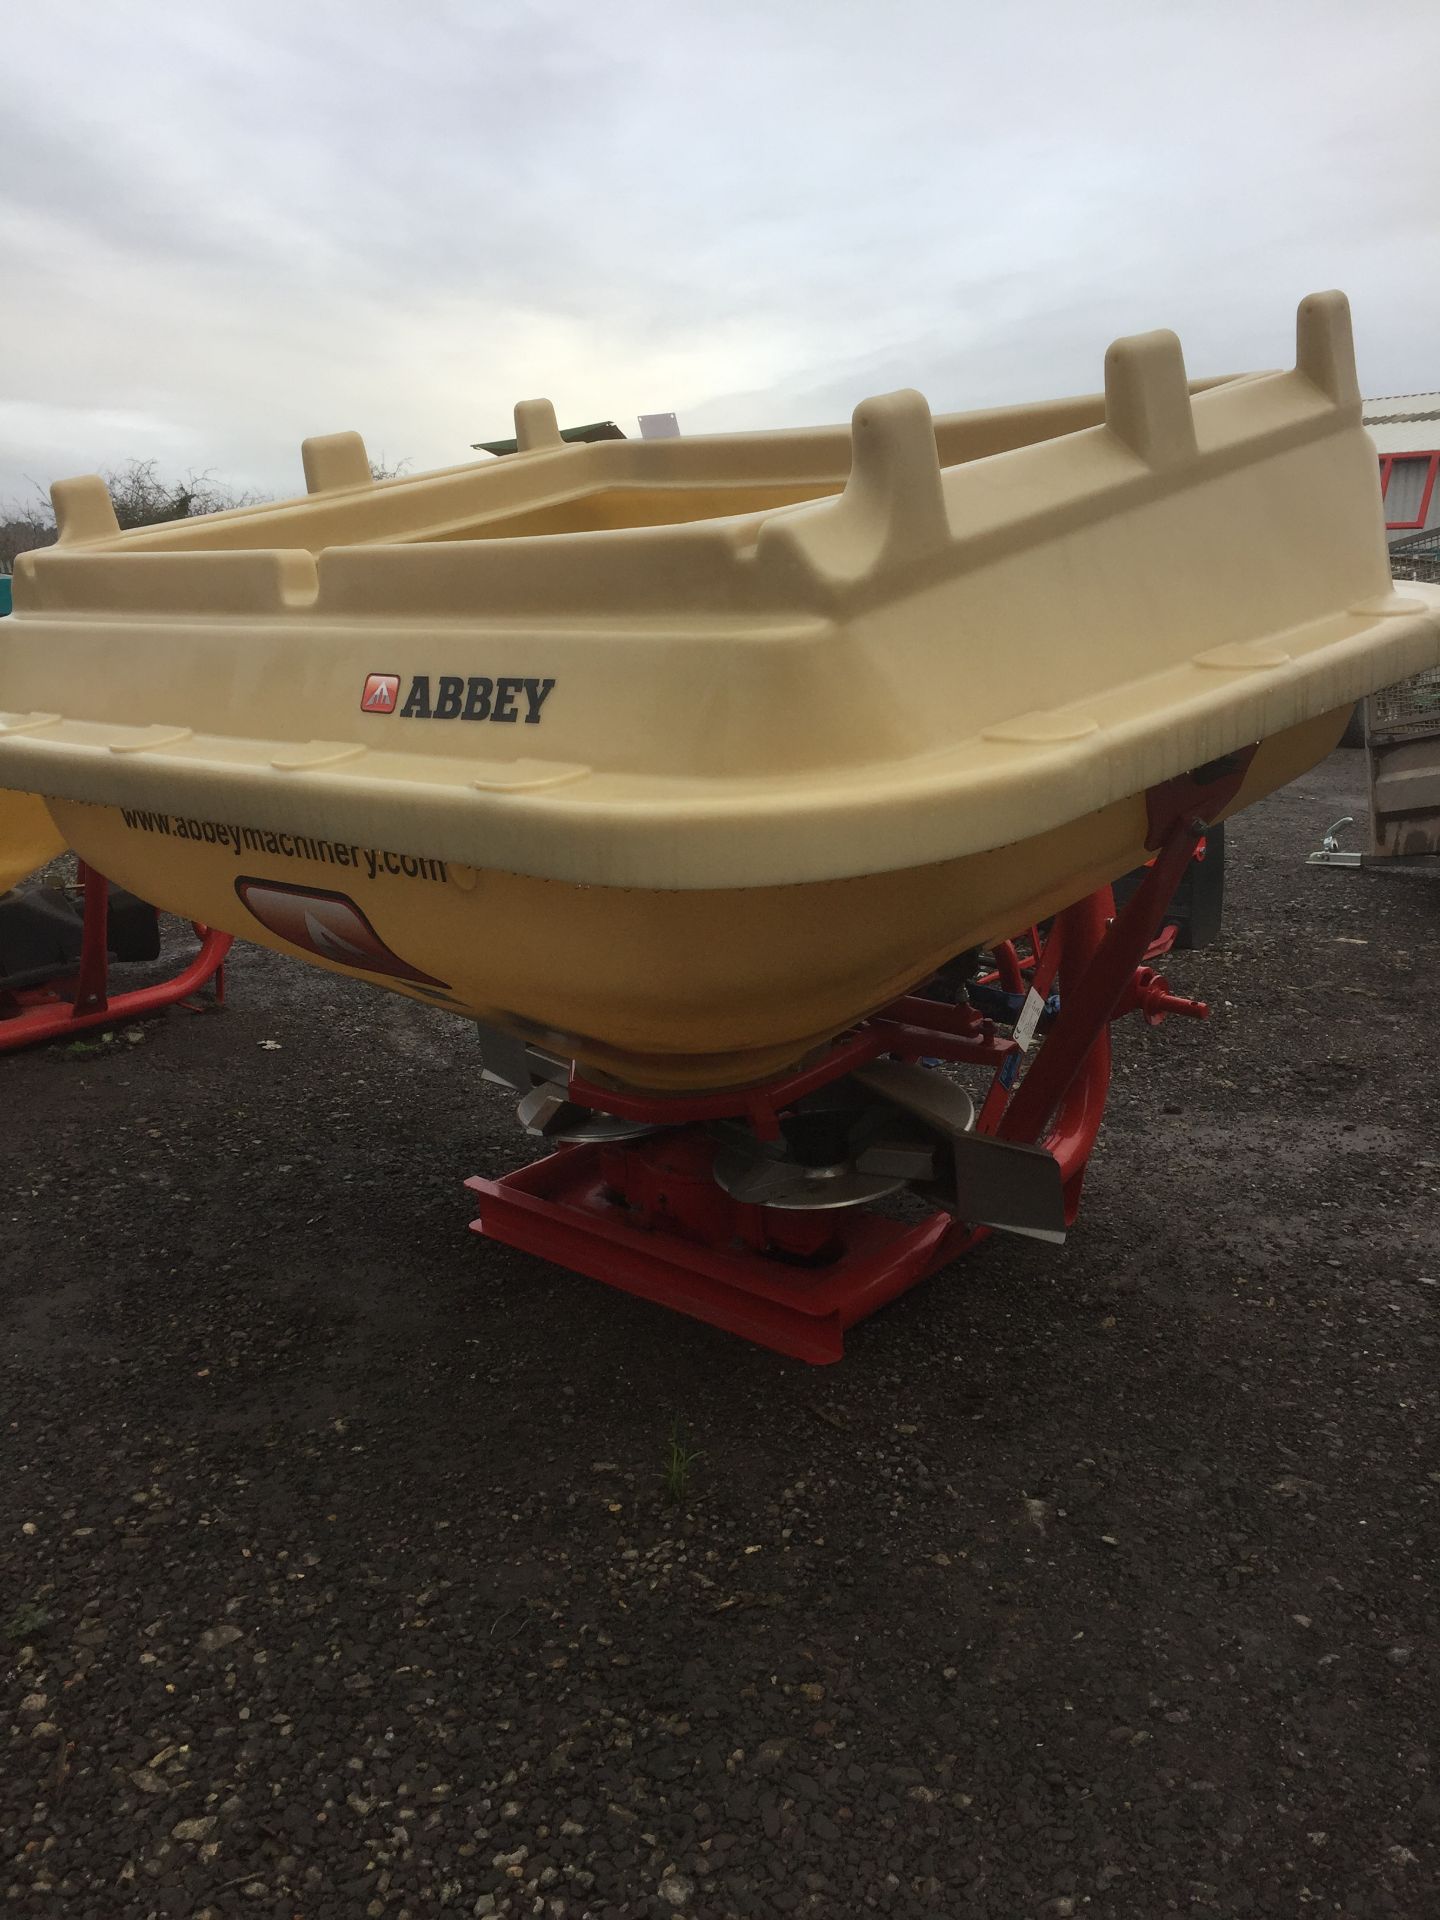 Abbey Machinery ATD 1200 twin disc fertilizer spinner (unused), Serial No. 62197 (2018) - Image 2 of 2